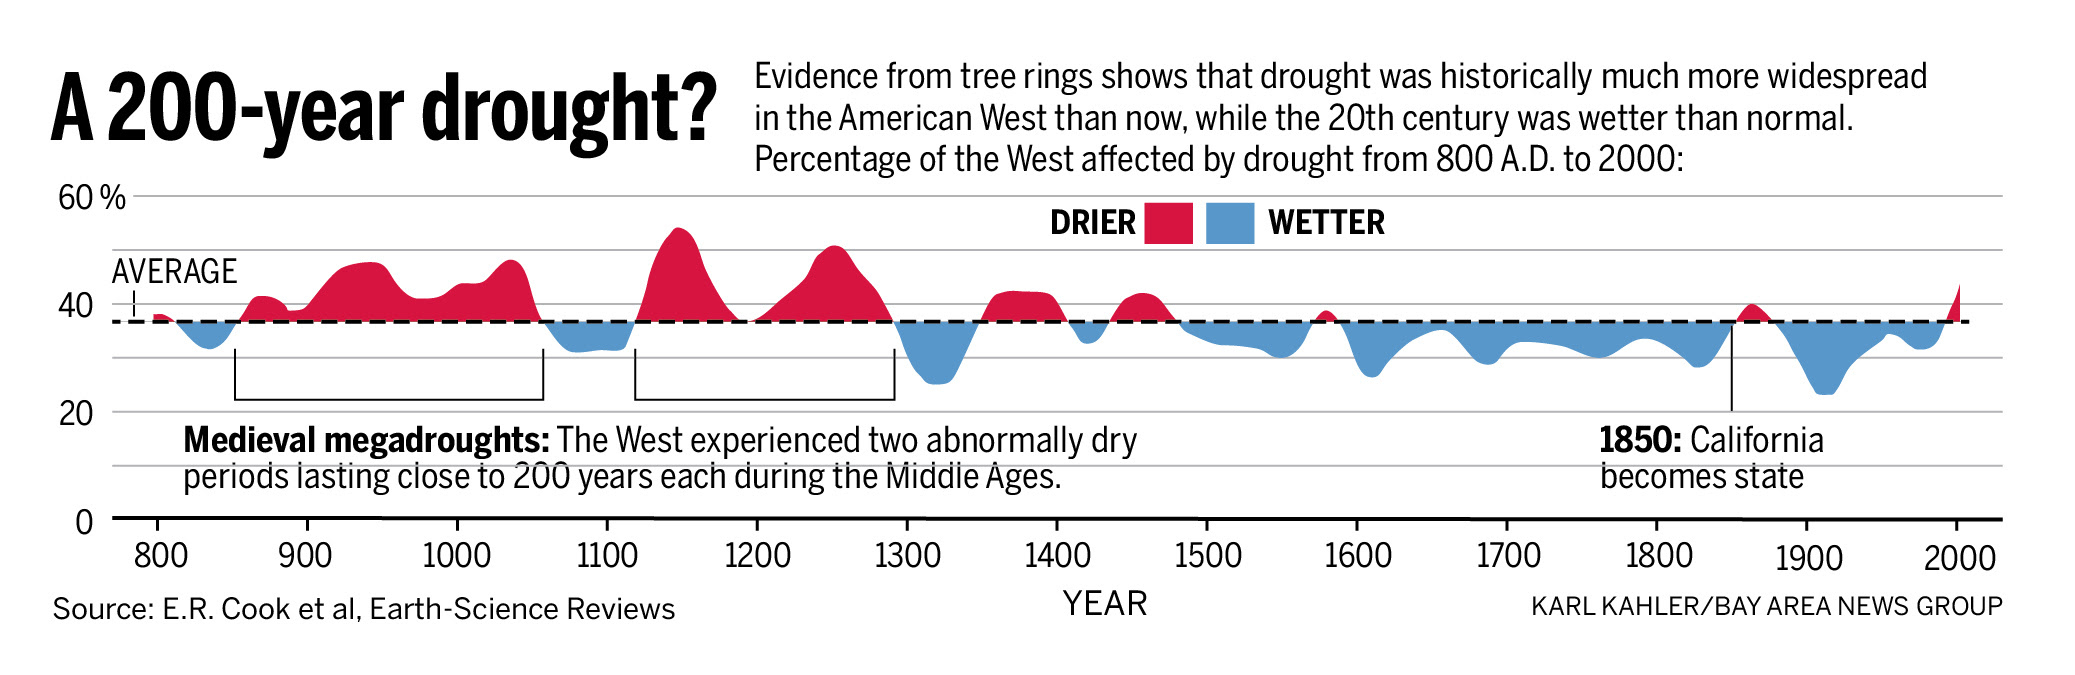  http://www.mercurynews.com/science/ci_24993601/california-drought-past-dry-periods-have-lasted-more 